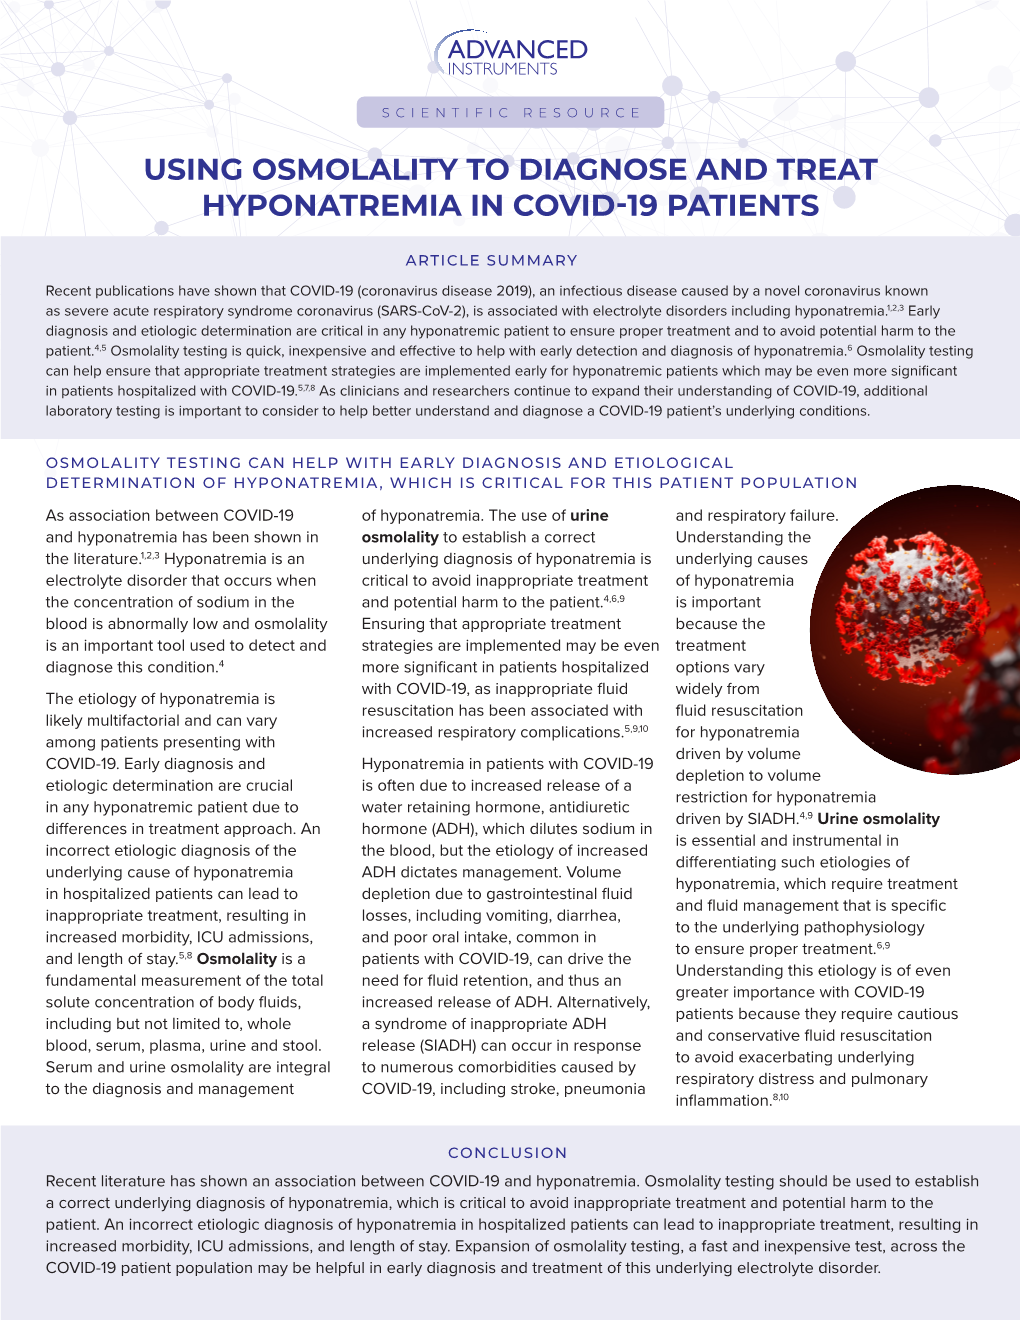 Using Osmolality to Diagnose and Treat Hyponatremia in Covid-19 Patients